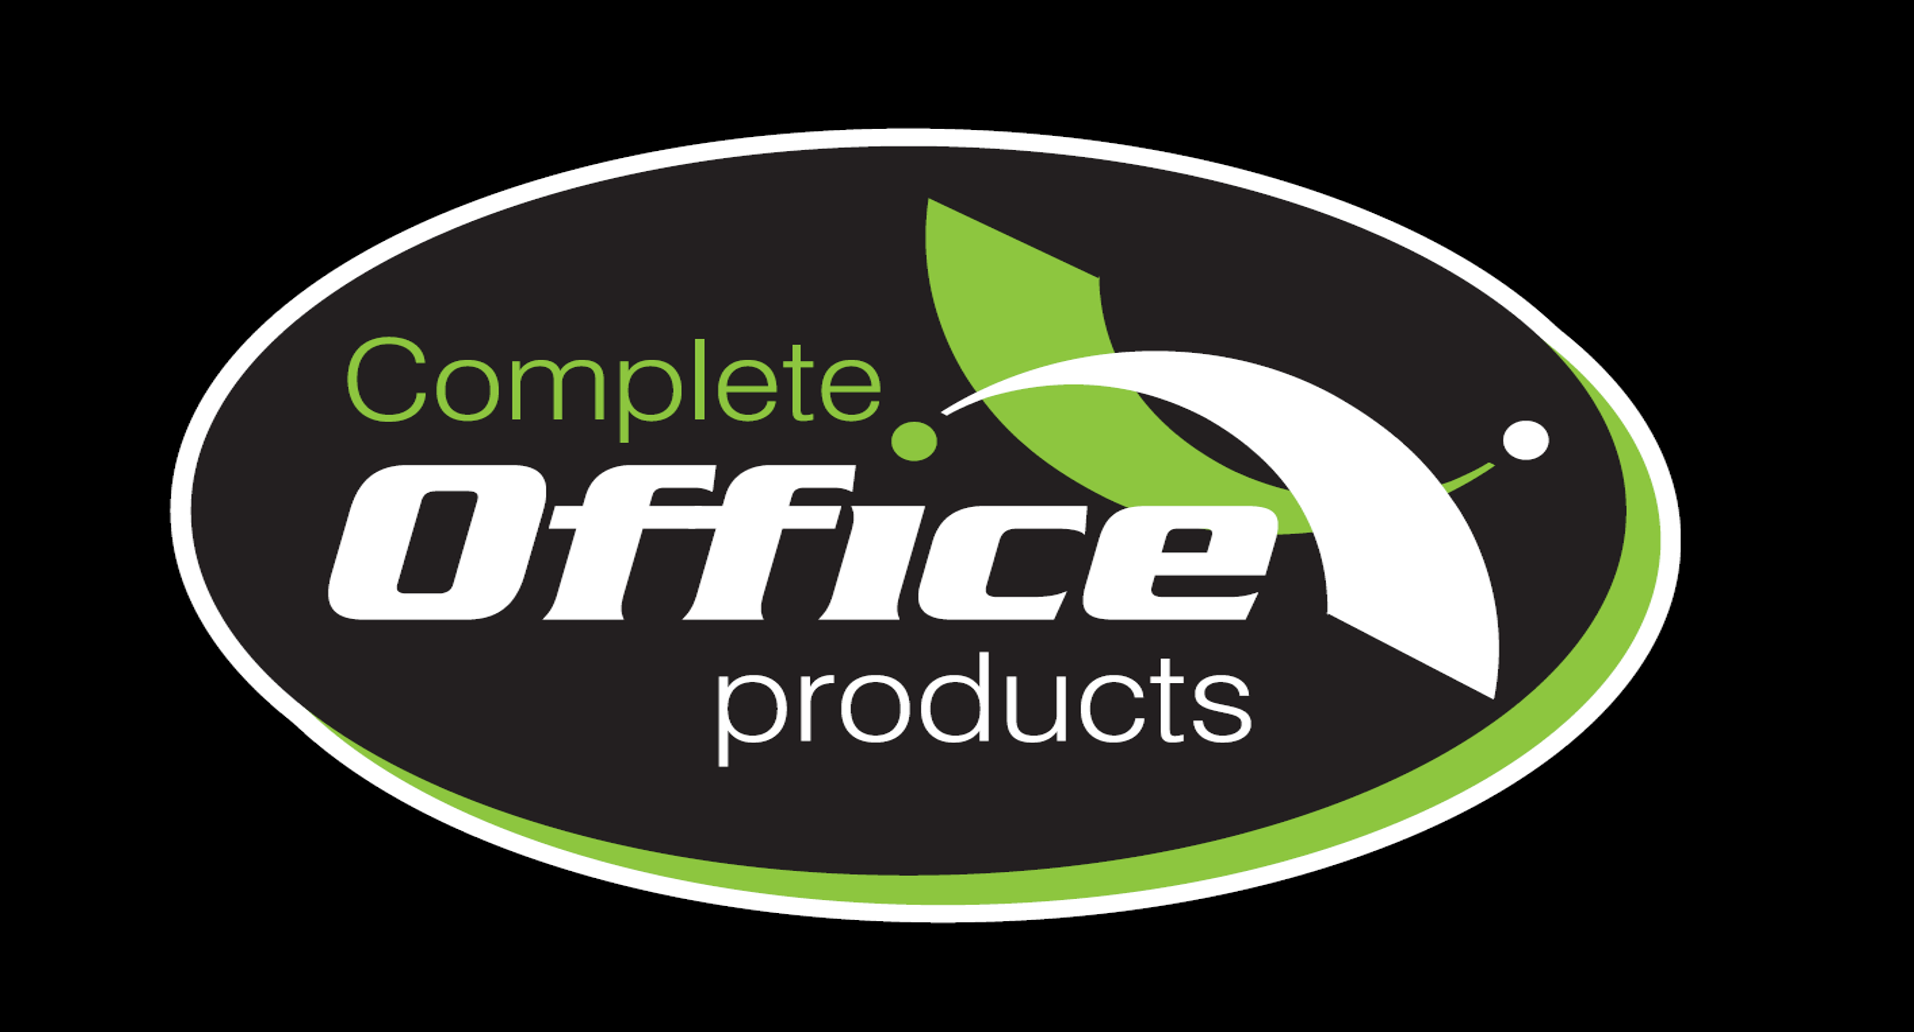 Complete Office Products Ltd.